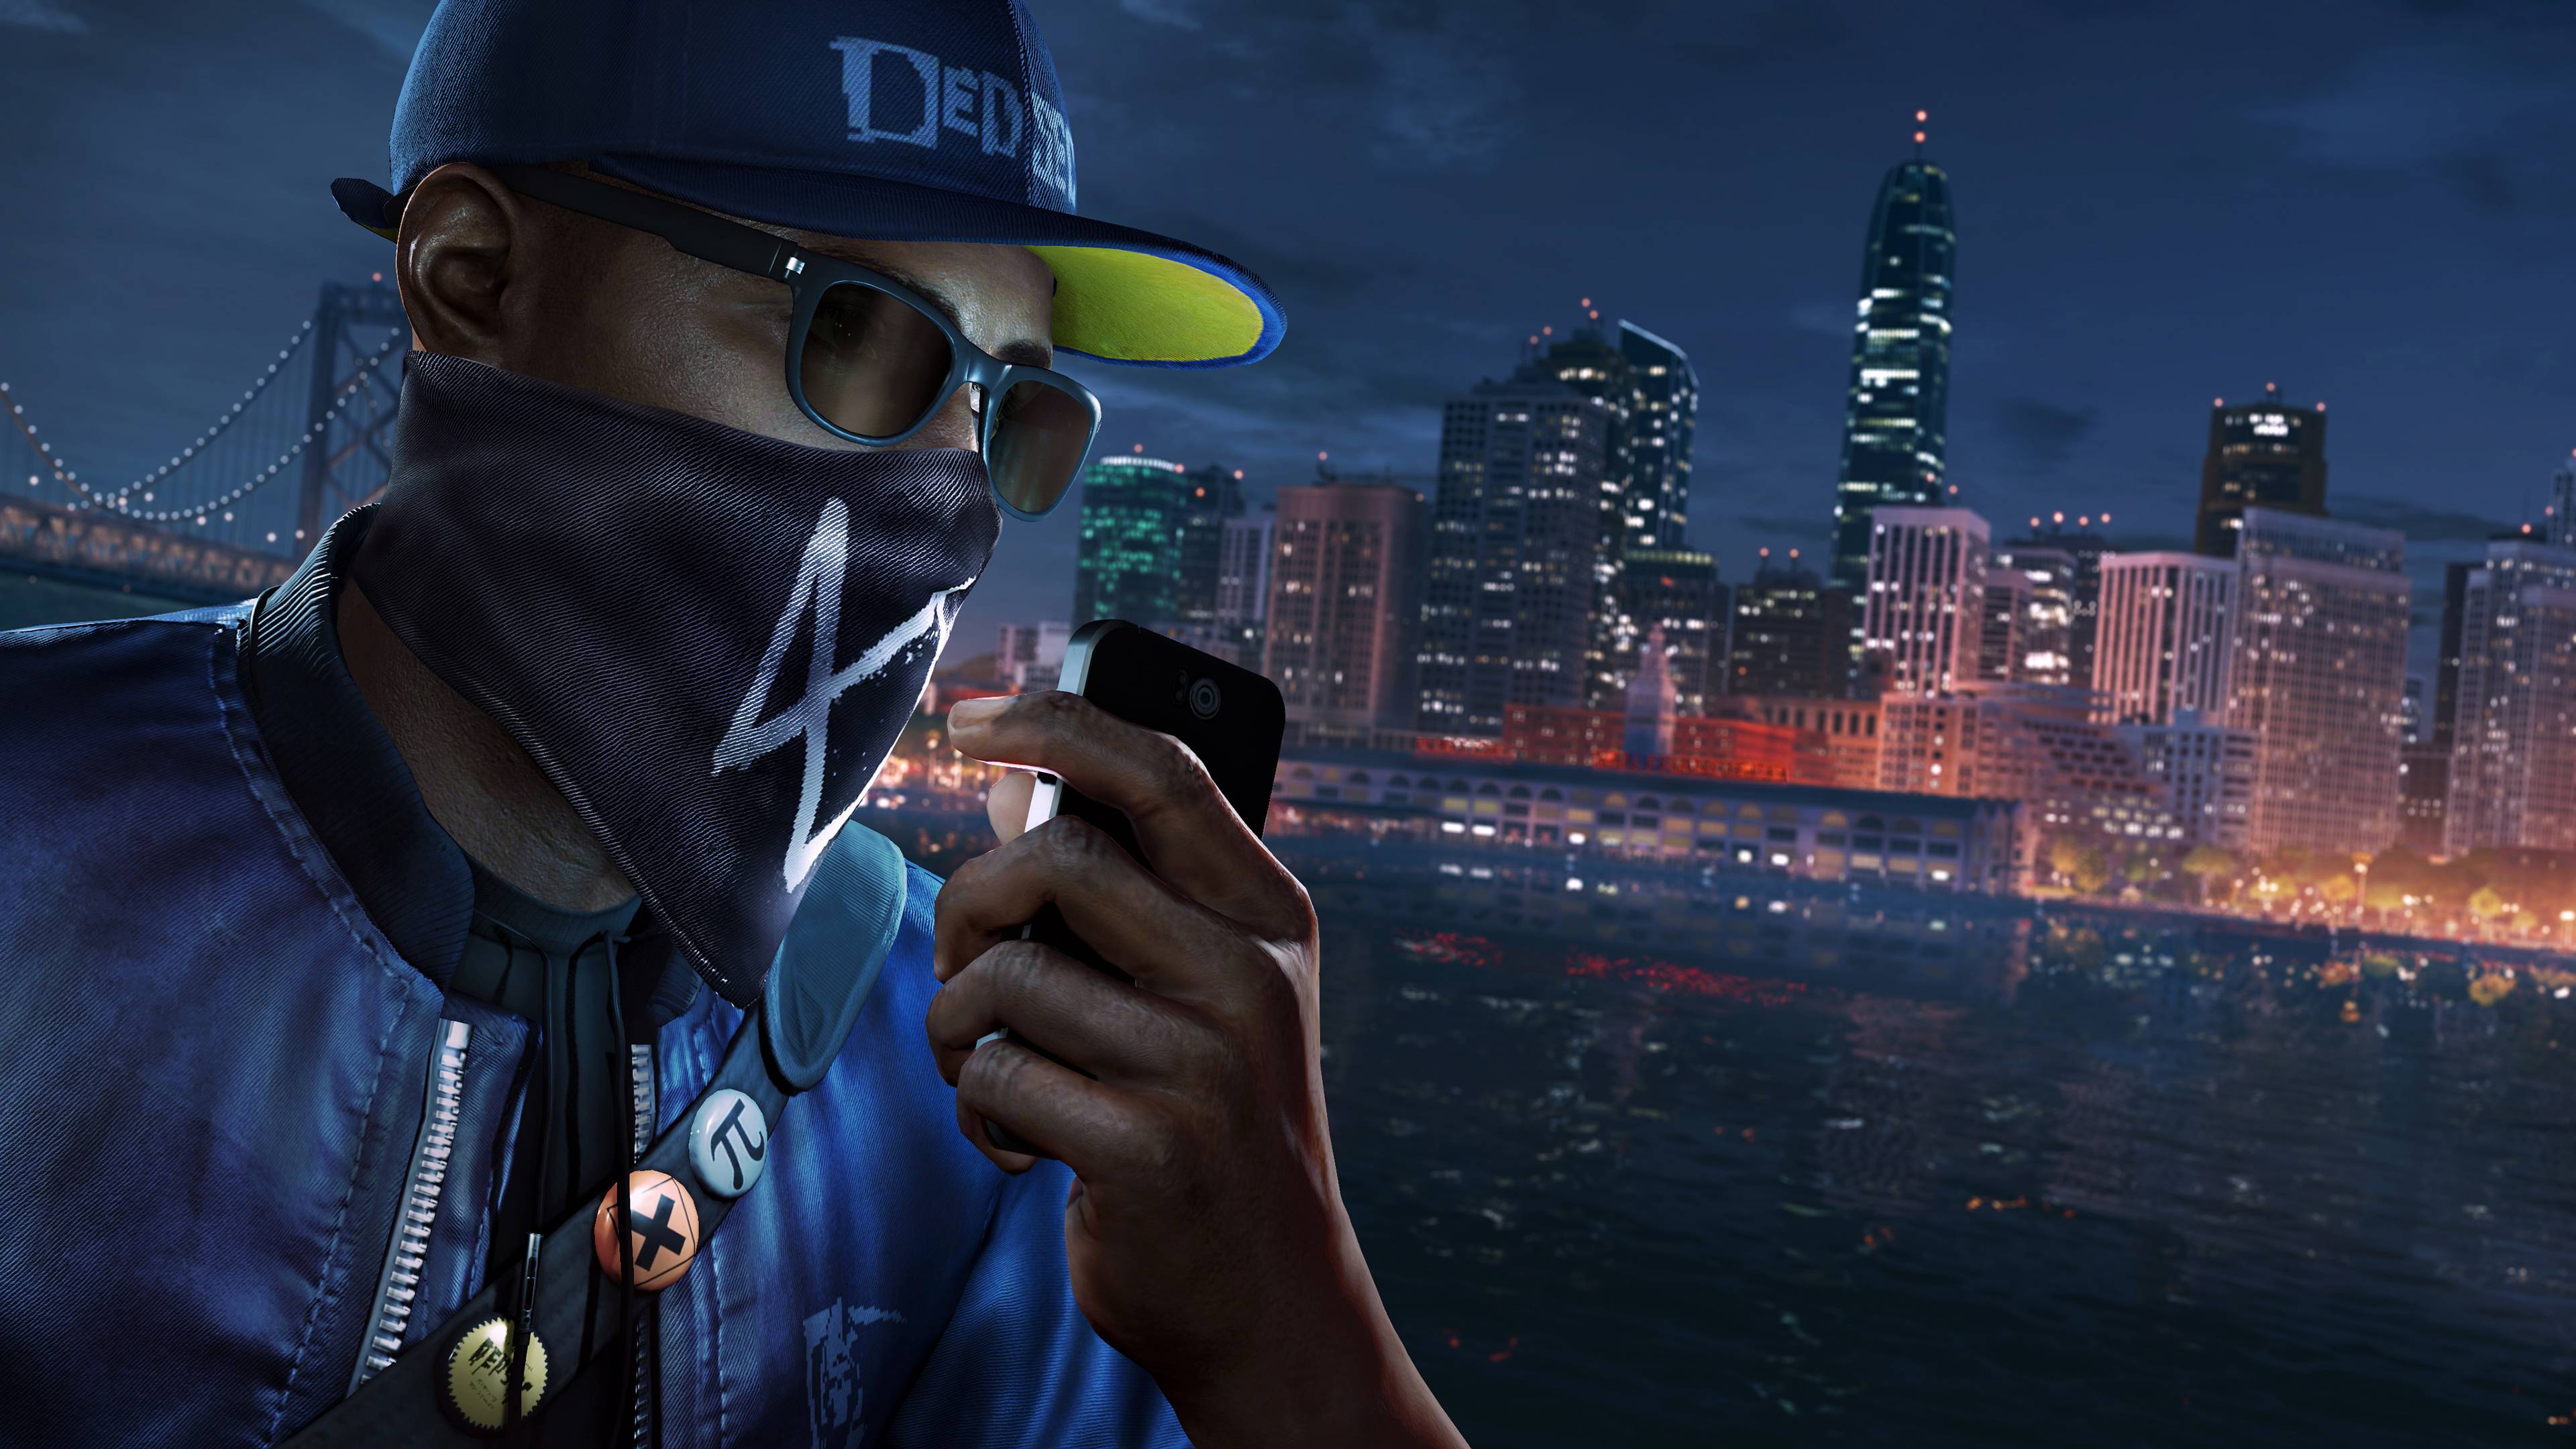 download watch dogs 2 with the lowest settings